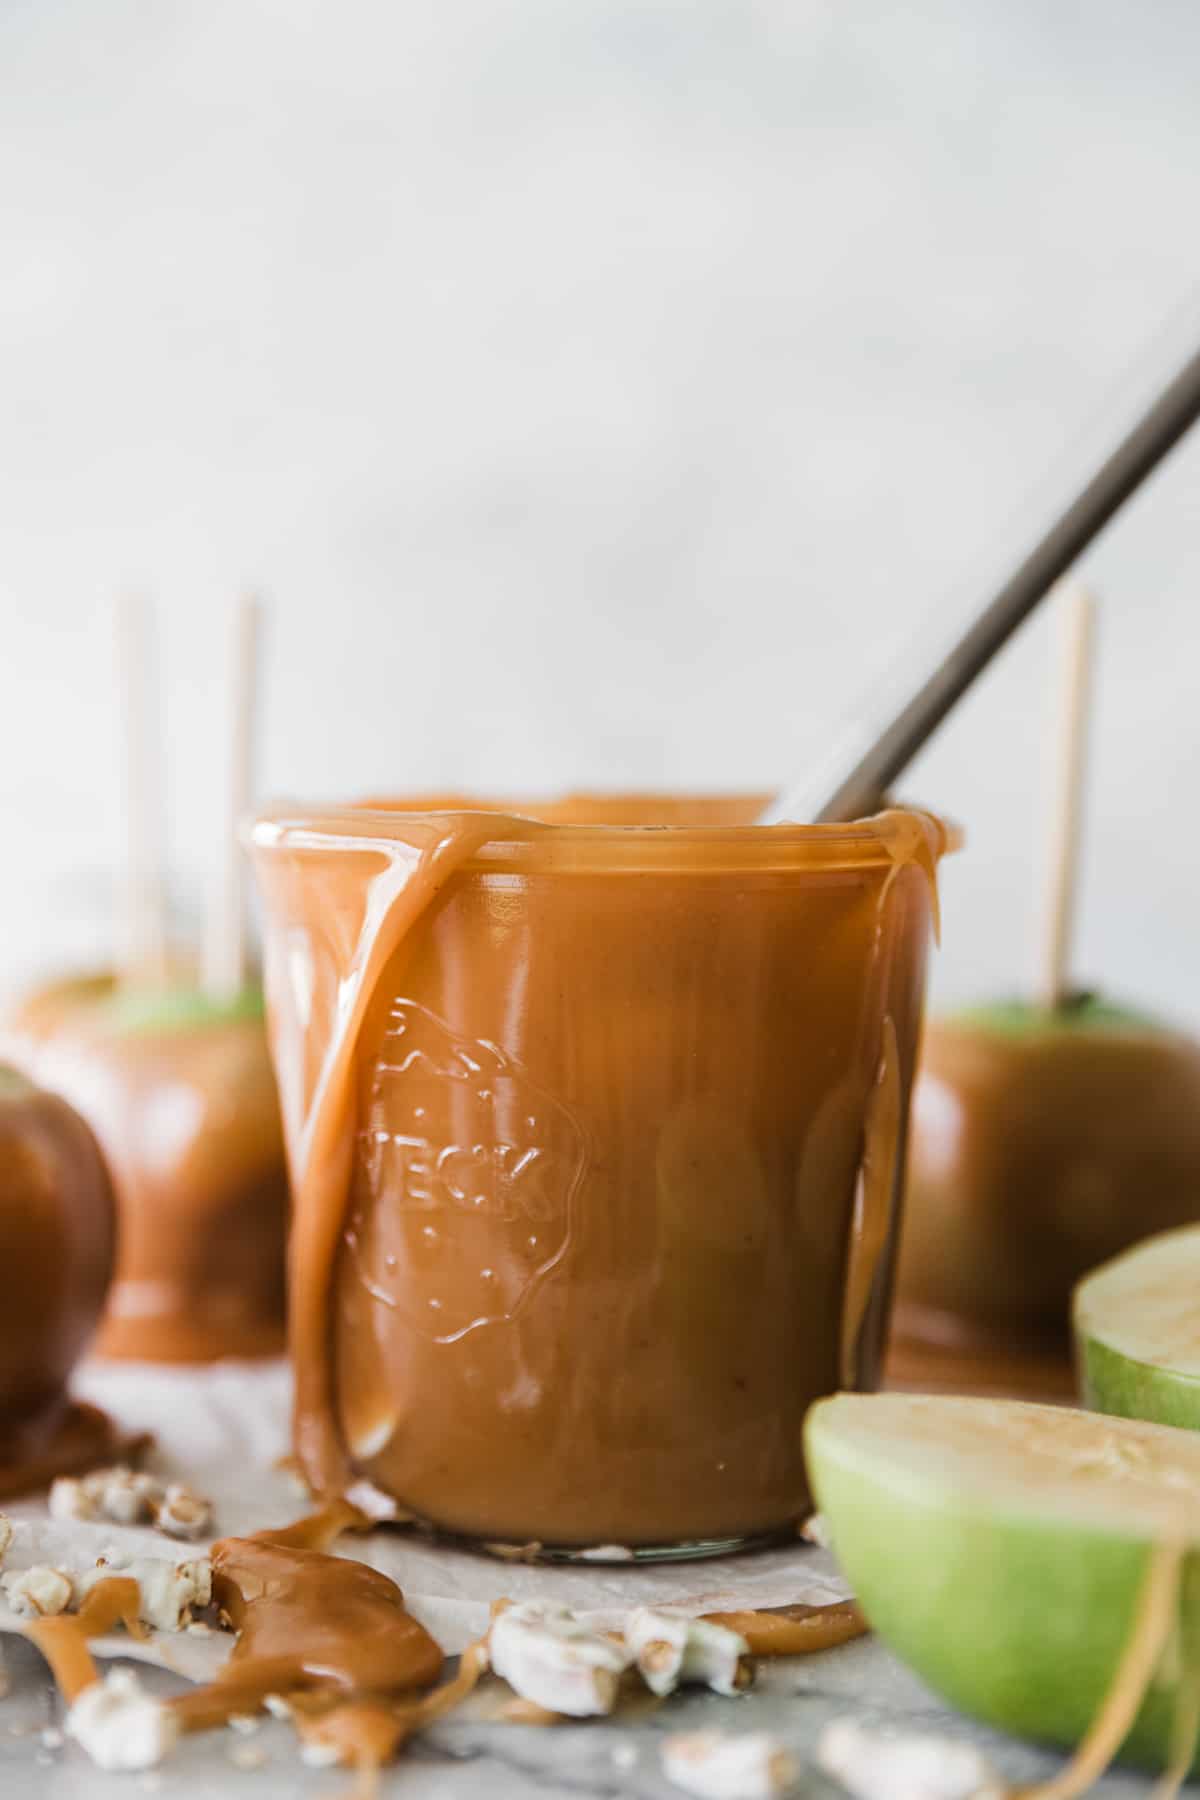 Caramel in a large glass